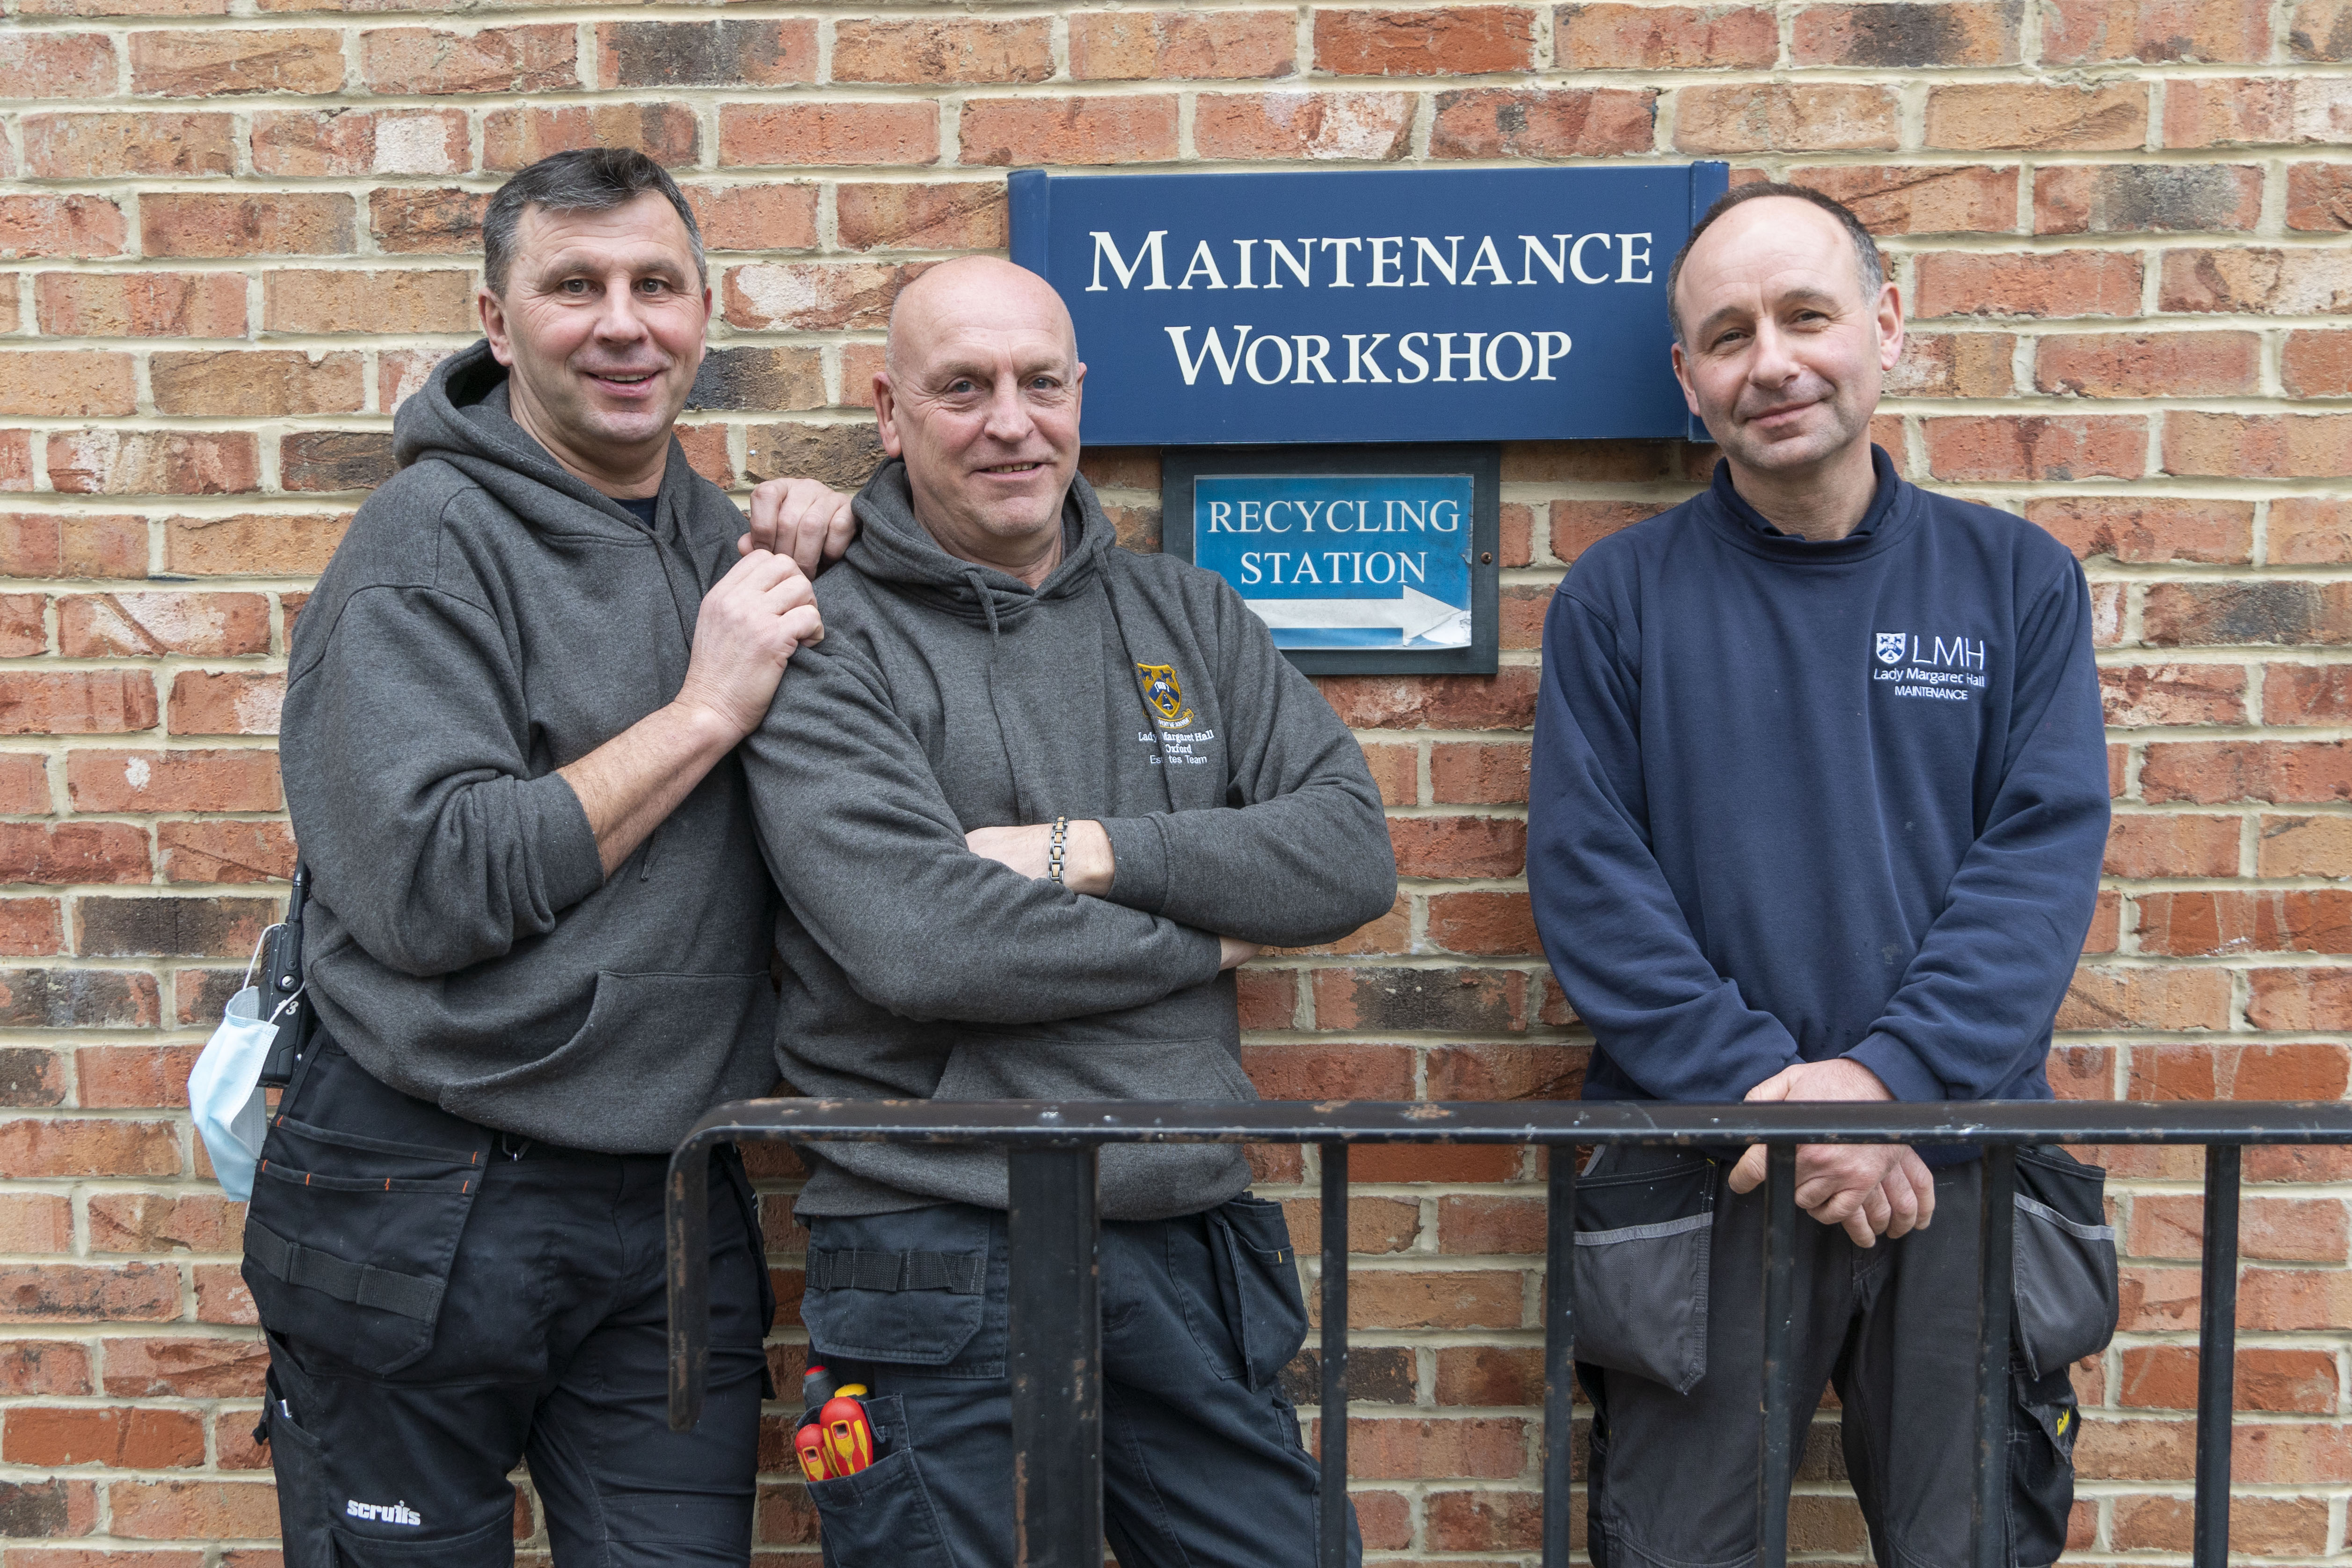 Members of the Maintenance Team standing outside the Maintenance Lodge at LMH